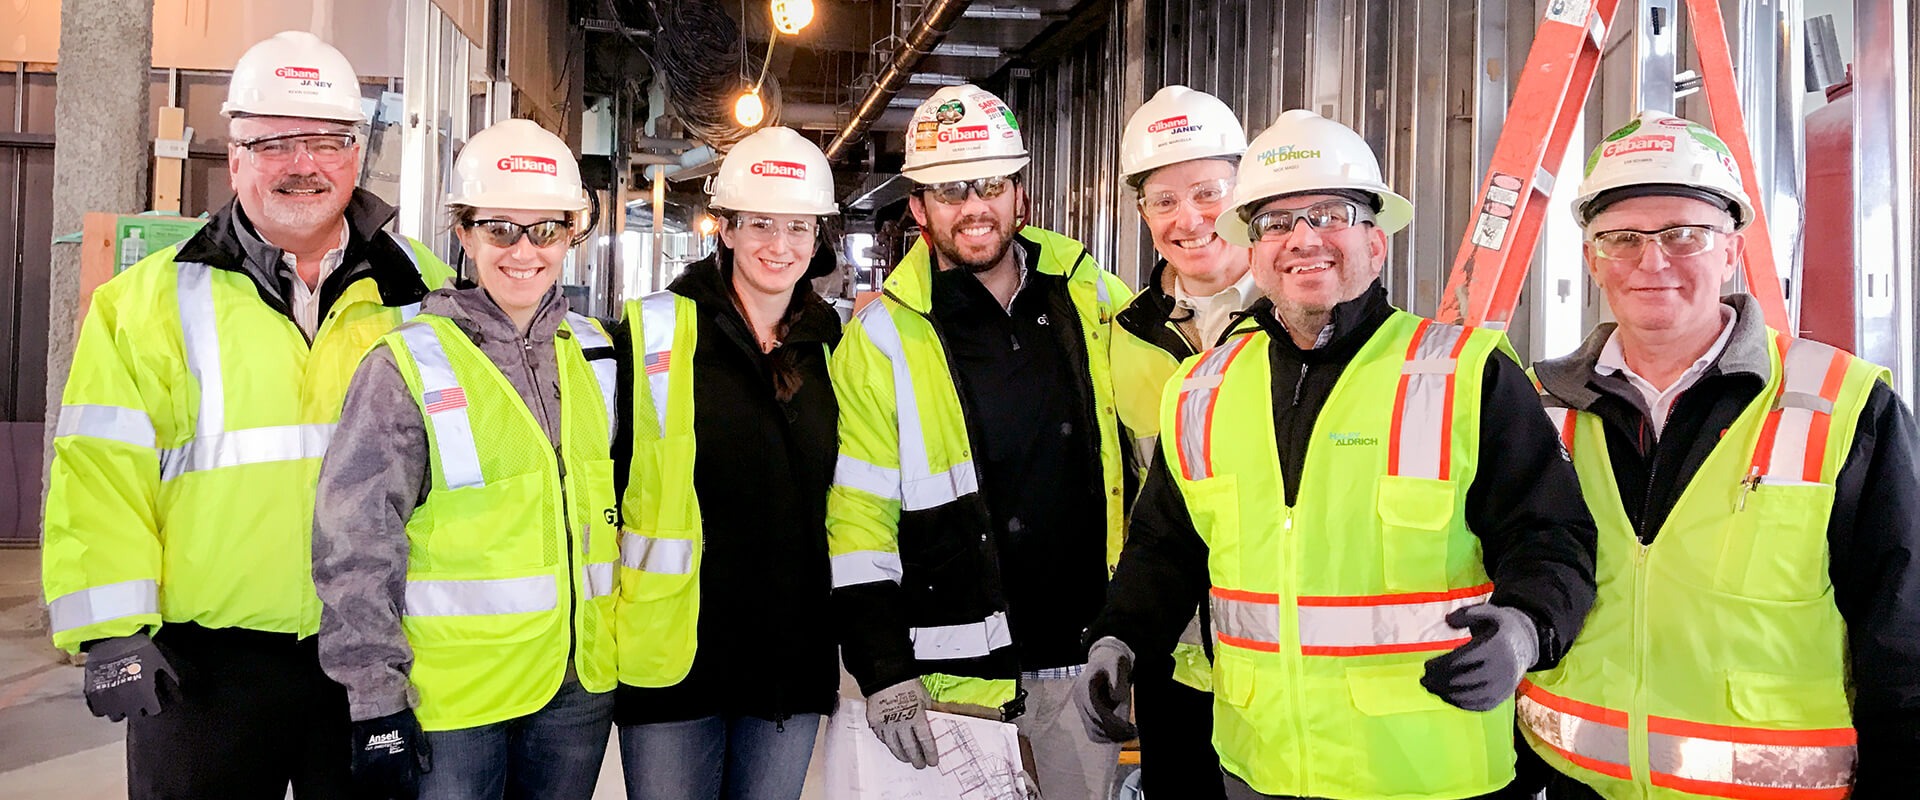 Group of men and women wearing personal protective equipment and smiling.